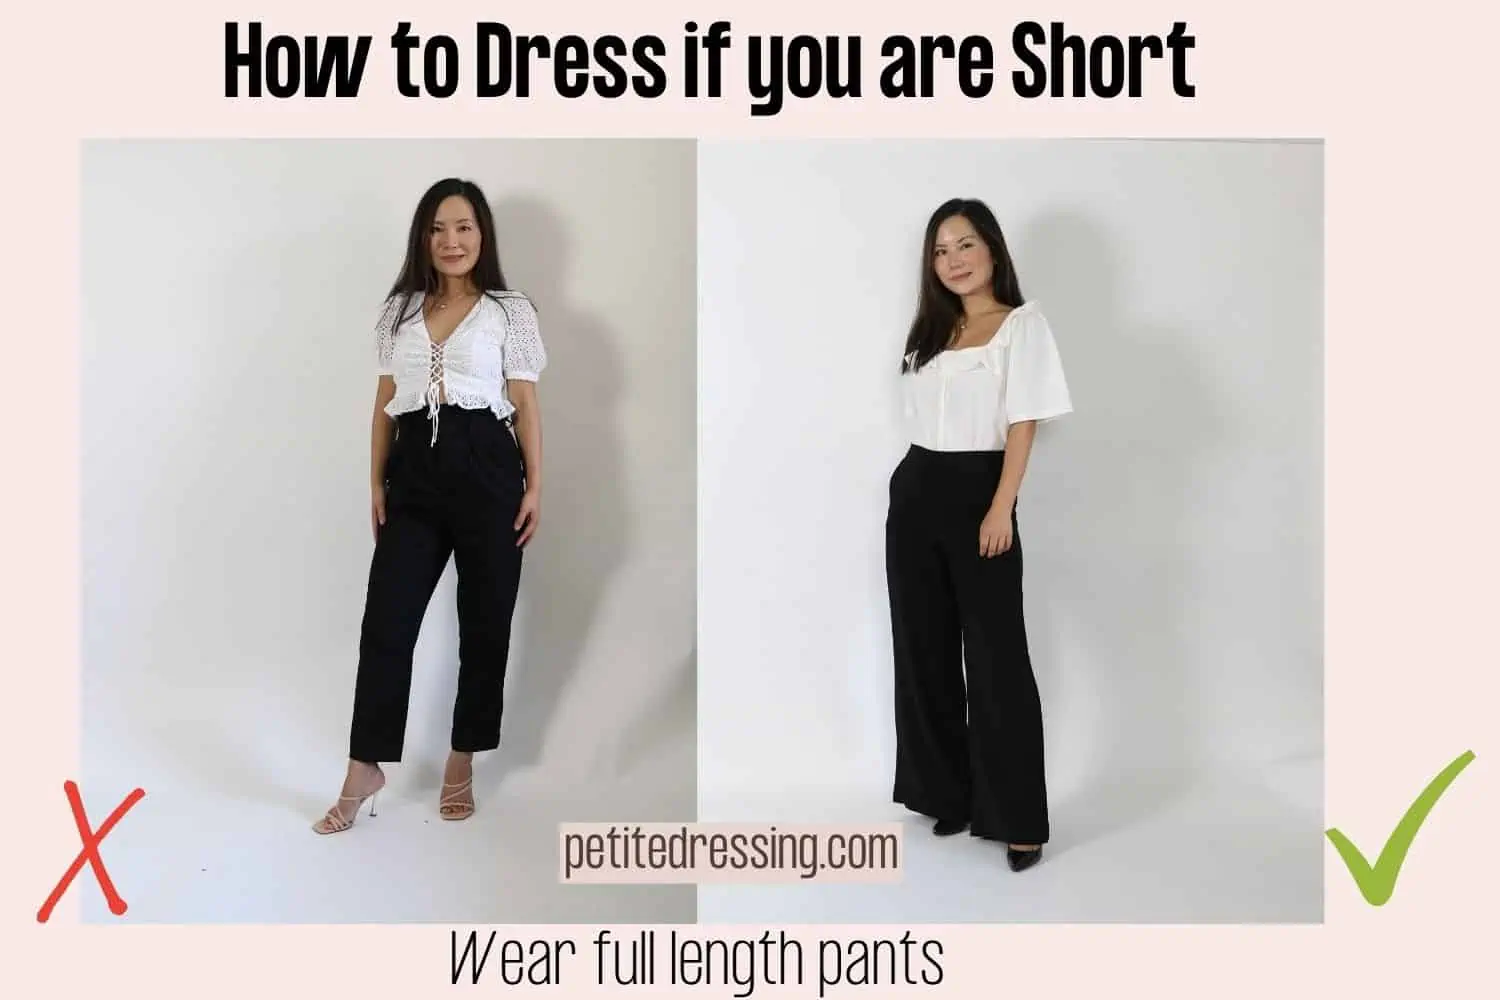 Should Girls Wear Short Clothes Or Should You Just Mind Your Own